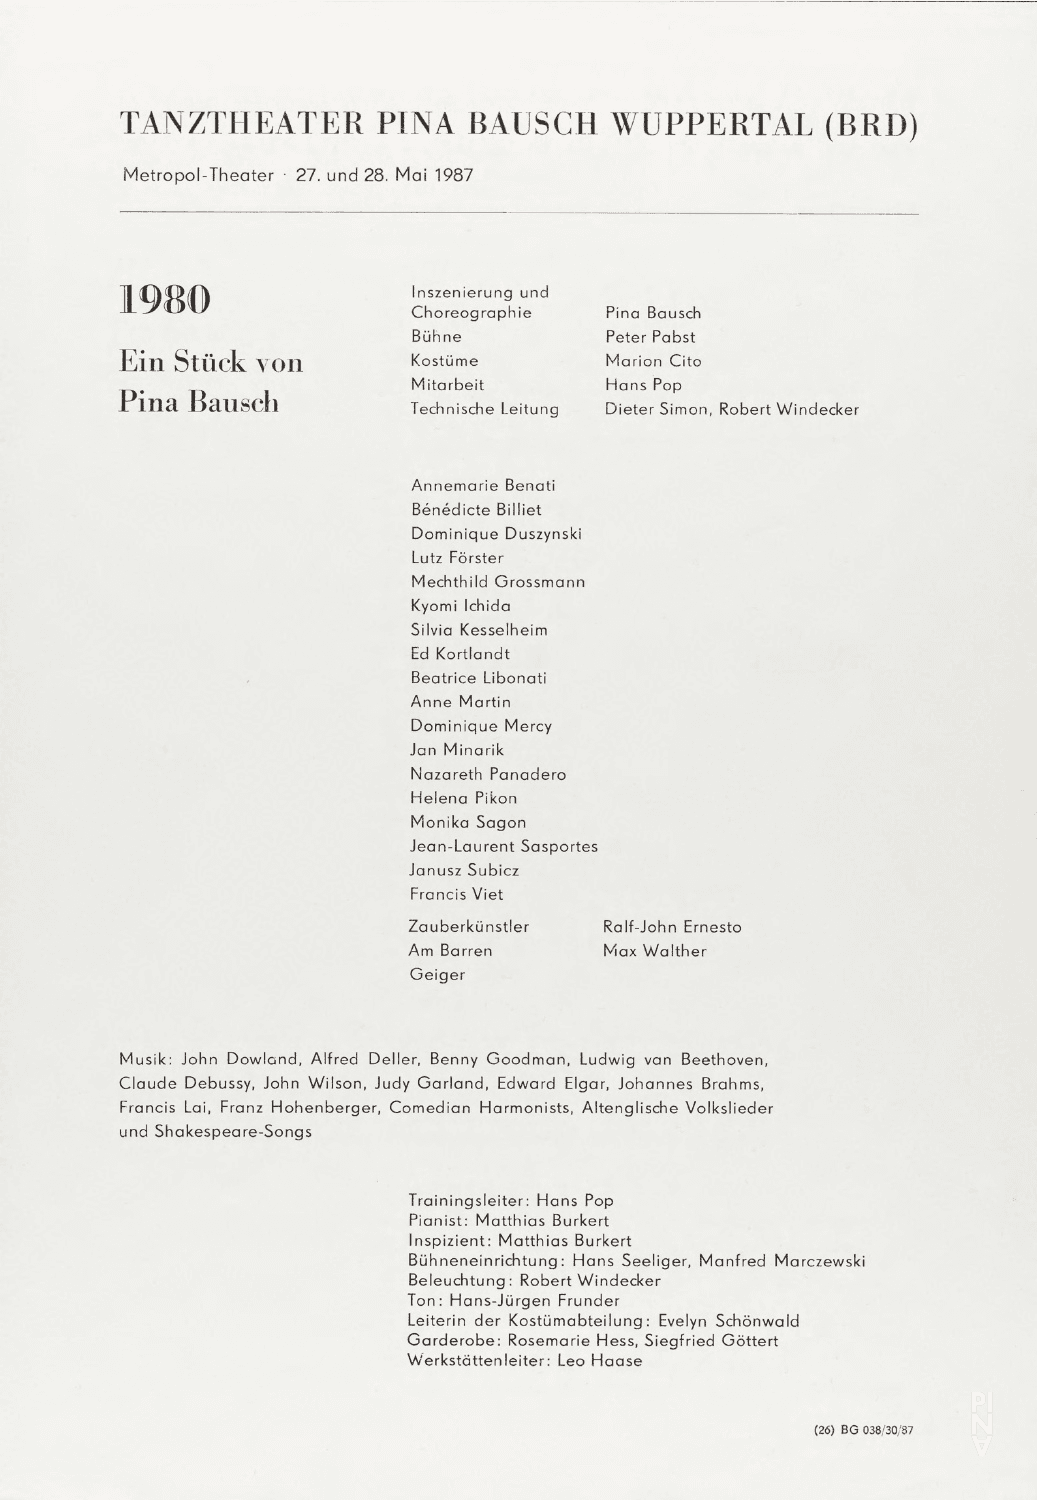 Evening leaflet for “1980 – A Piece by Pina Bausch” by Pina Bausch with Tanztheater Wuppertal in in Berlin, 05/27/1987 – 05/28/1987